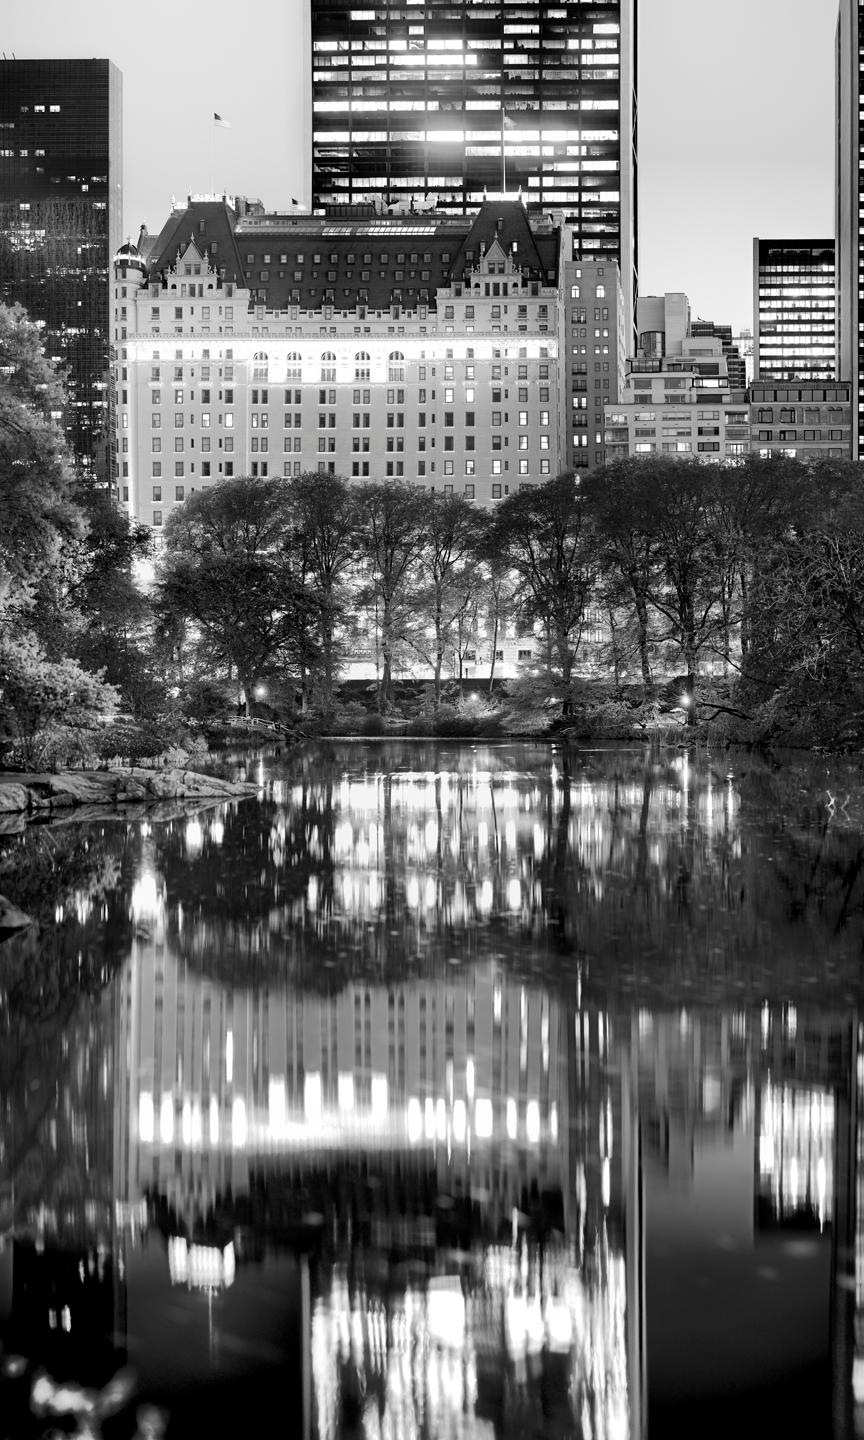 Jeff Chien-Hsing Liao
Summer Solstice, 2015
Archival Pigment Print
40 x 24 inches
Edition of 9

This photograph is from Liao's series, Central Park New York - 24 Solar Terms.  The title of the series takes its name from the ancient Chinese lunar